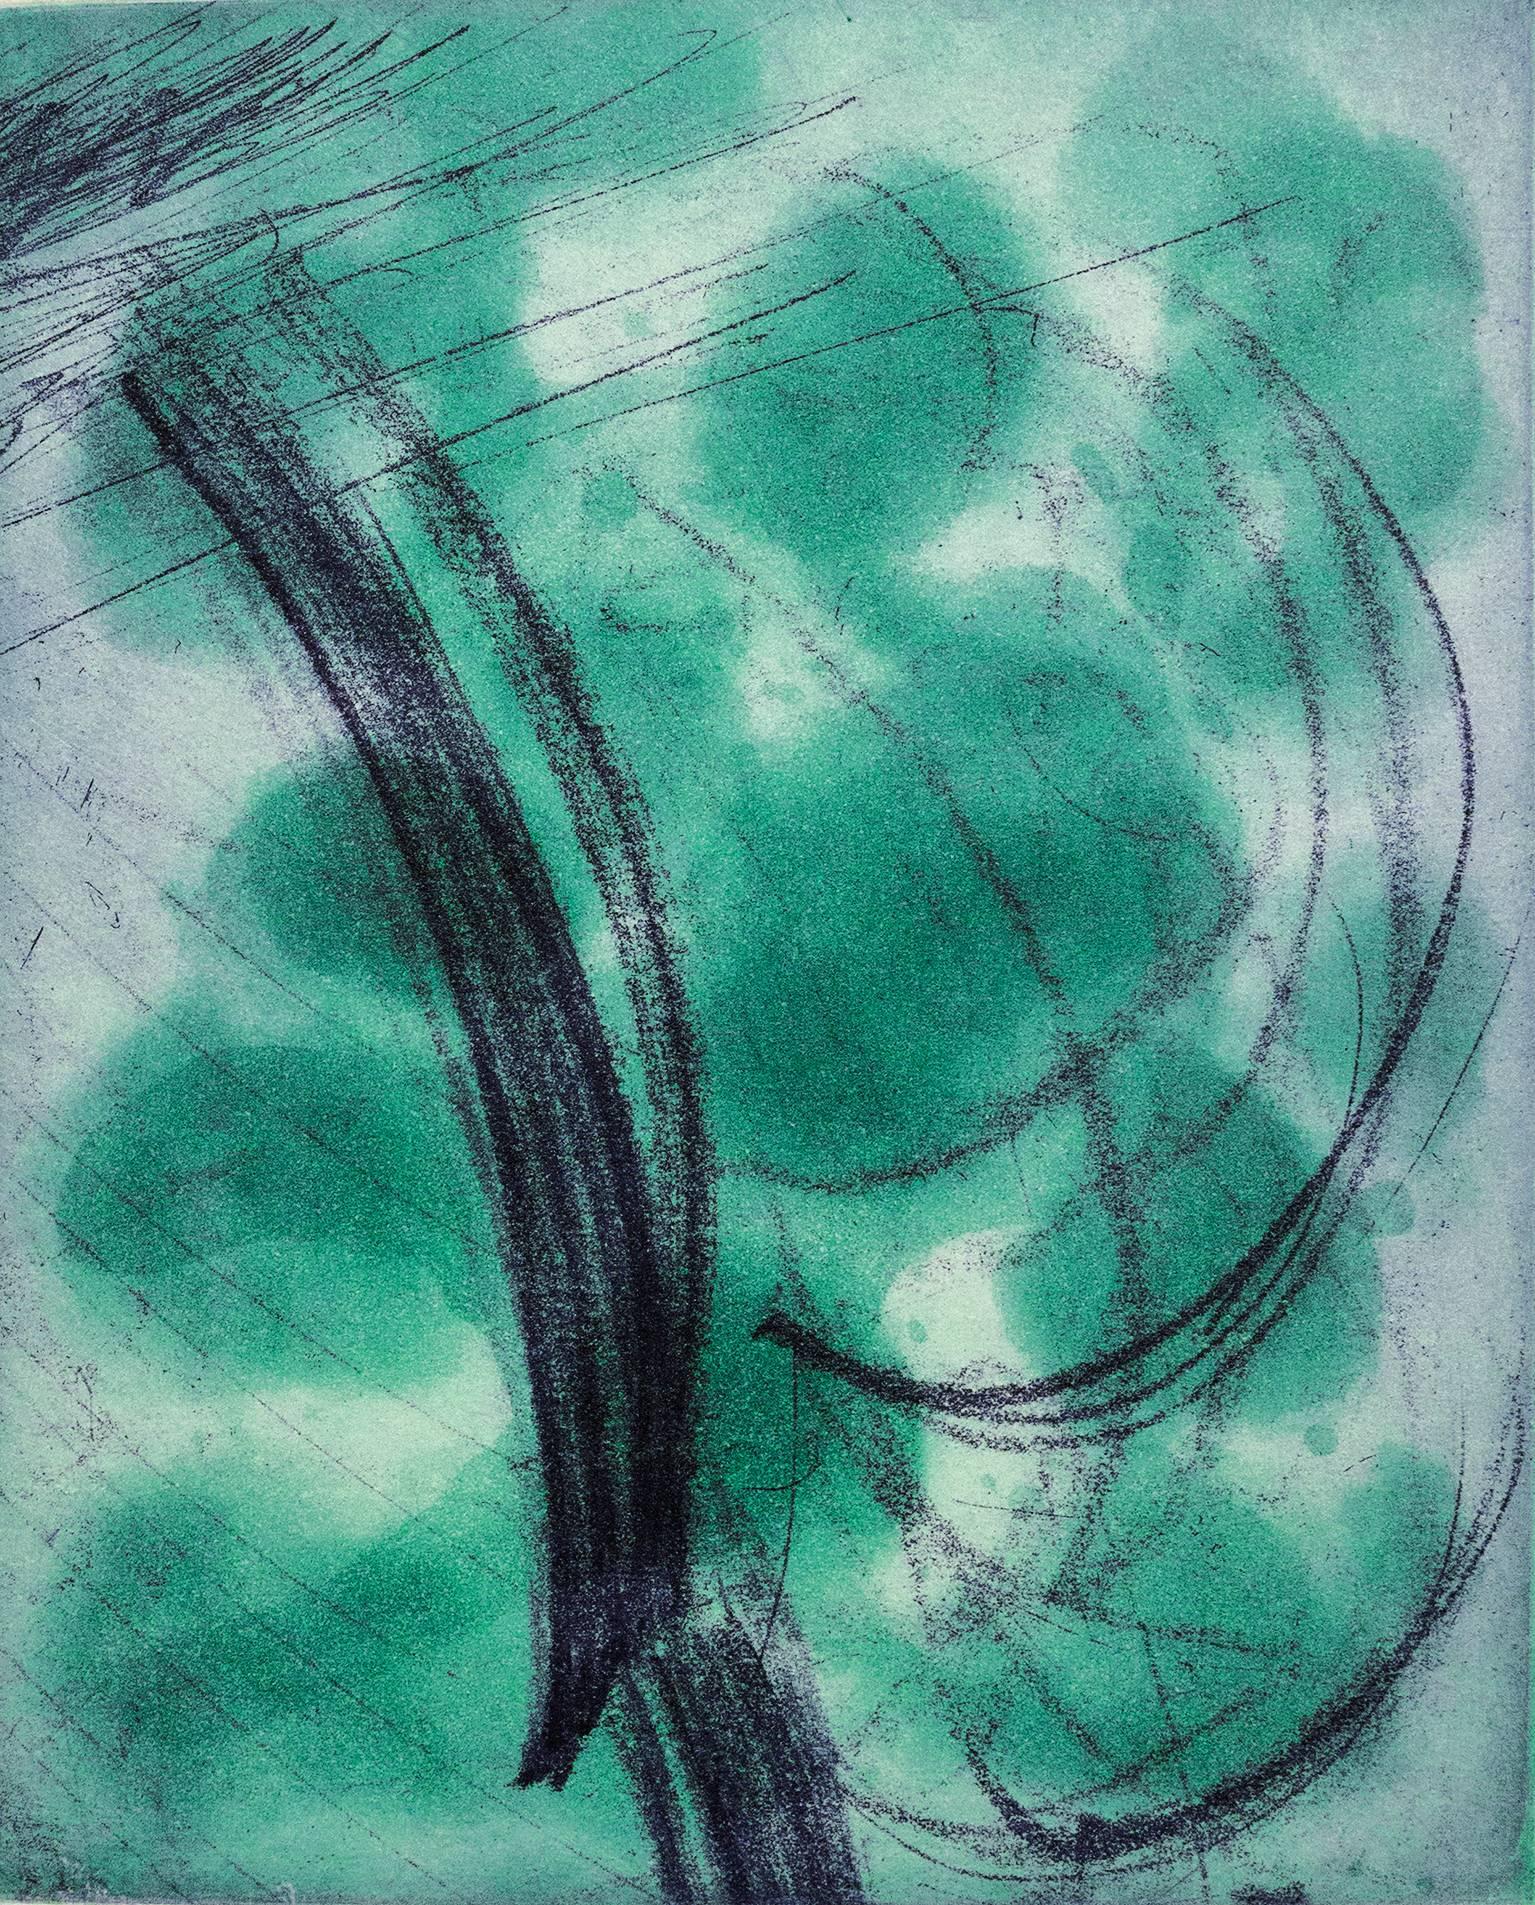 Kumi Korf Abstract Print - So Much Green, abstract etching, spit bite print, green, blue, Asian influence.